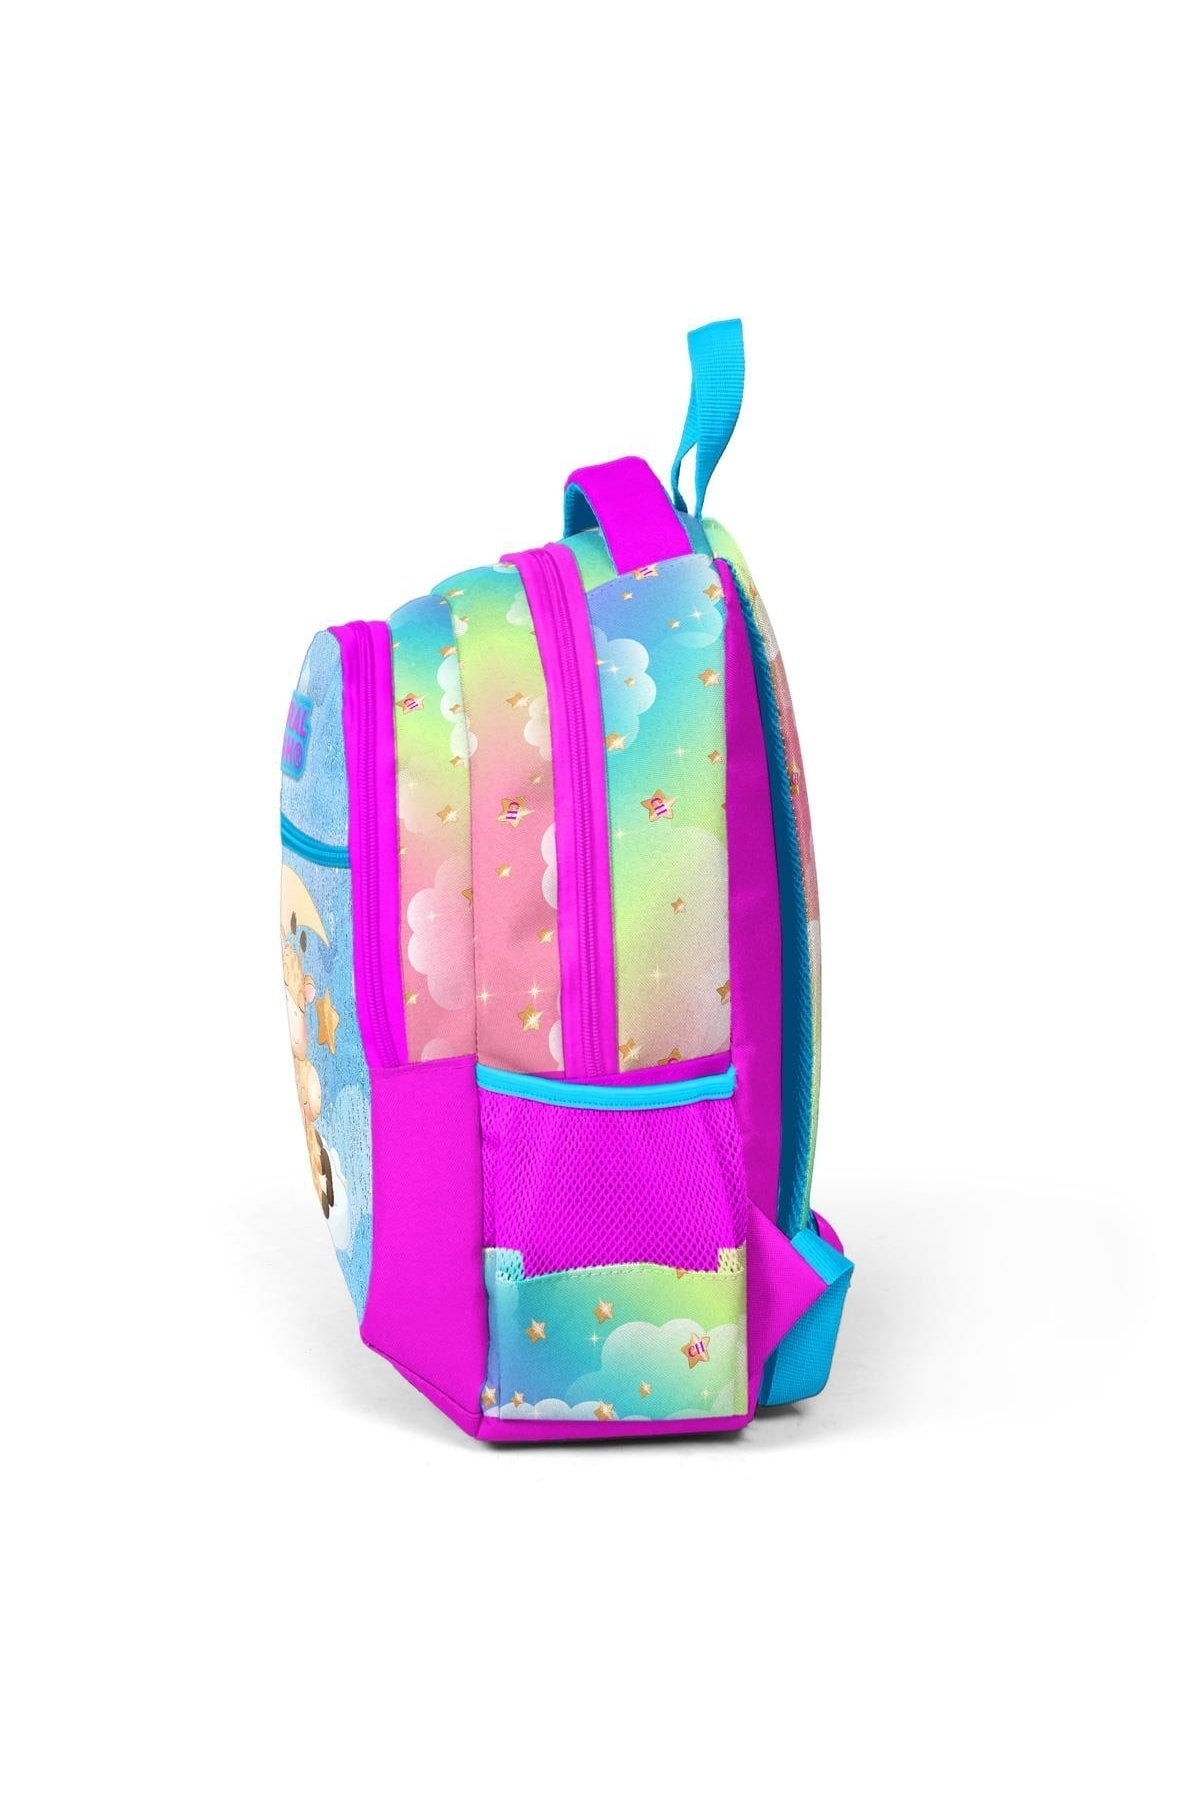 Kids Blue Pink Giraffe Patterned Three Compartment School Backpack 23479